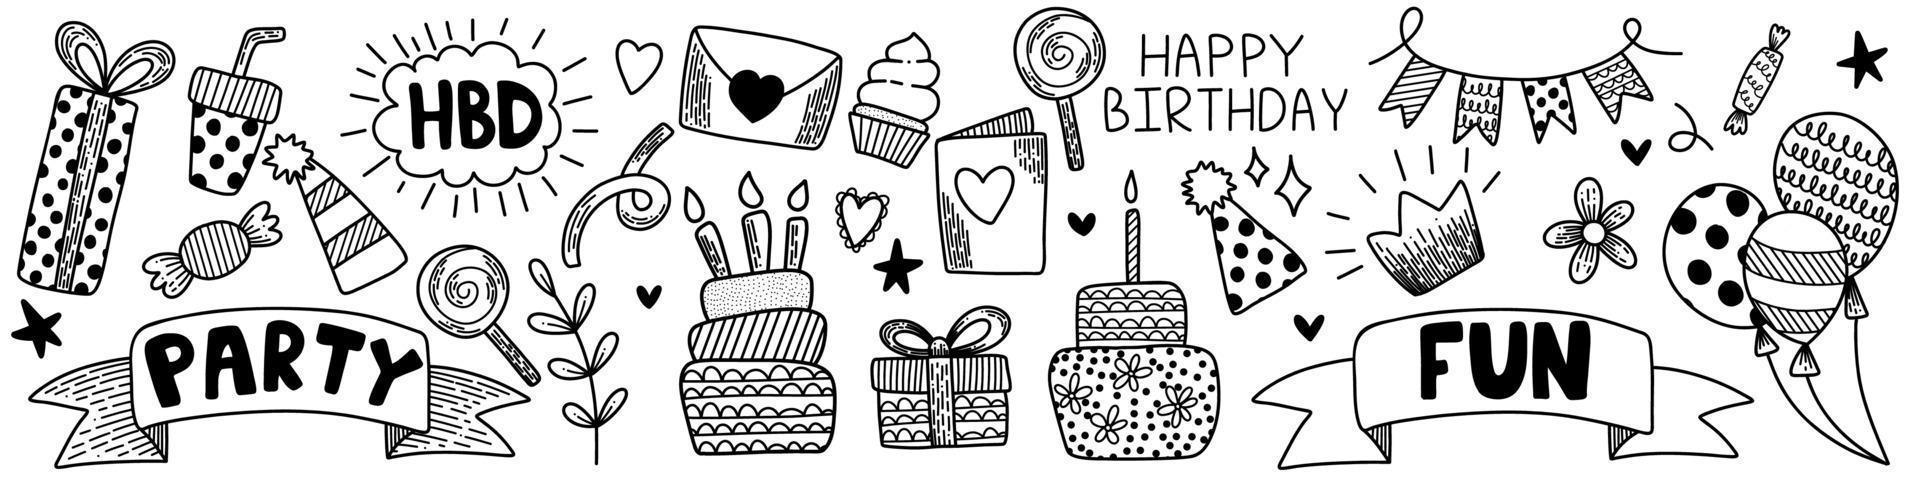 Vector set of happy birthday vector elements on white background. Handdrawn doodle outline line art icons for decoration greeting invitation cards stickers package. Cakes, symbols of celebration party